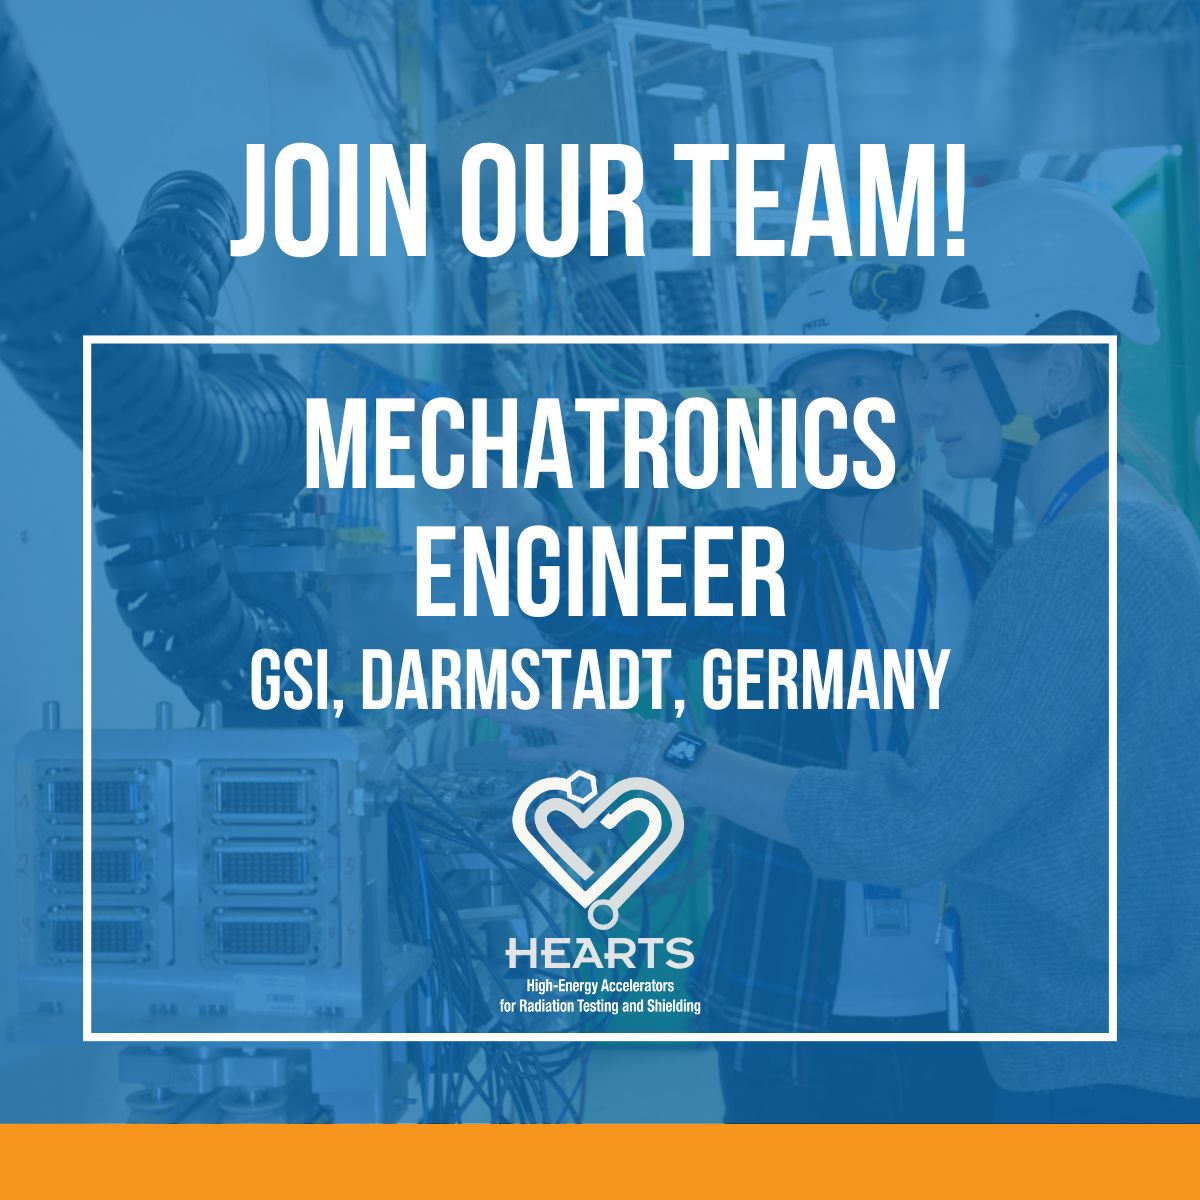 Job offer at GSI in Mechatronics engineering